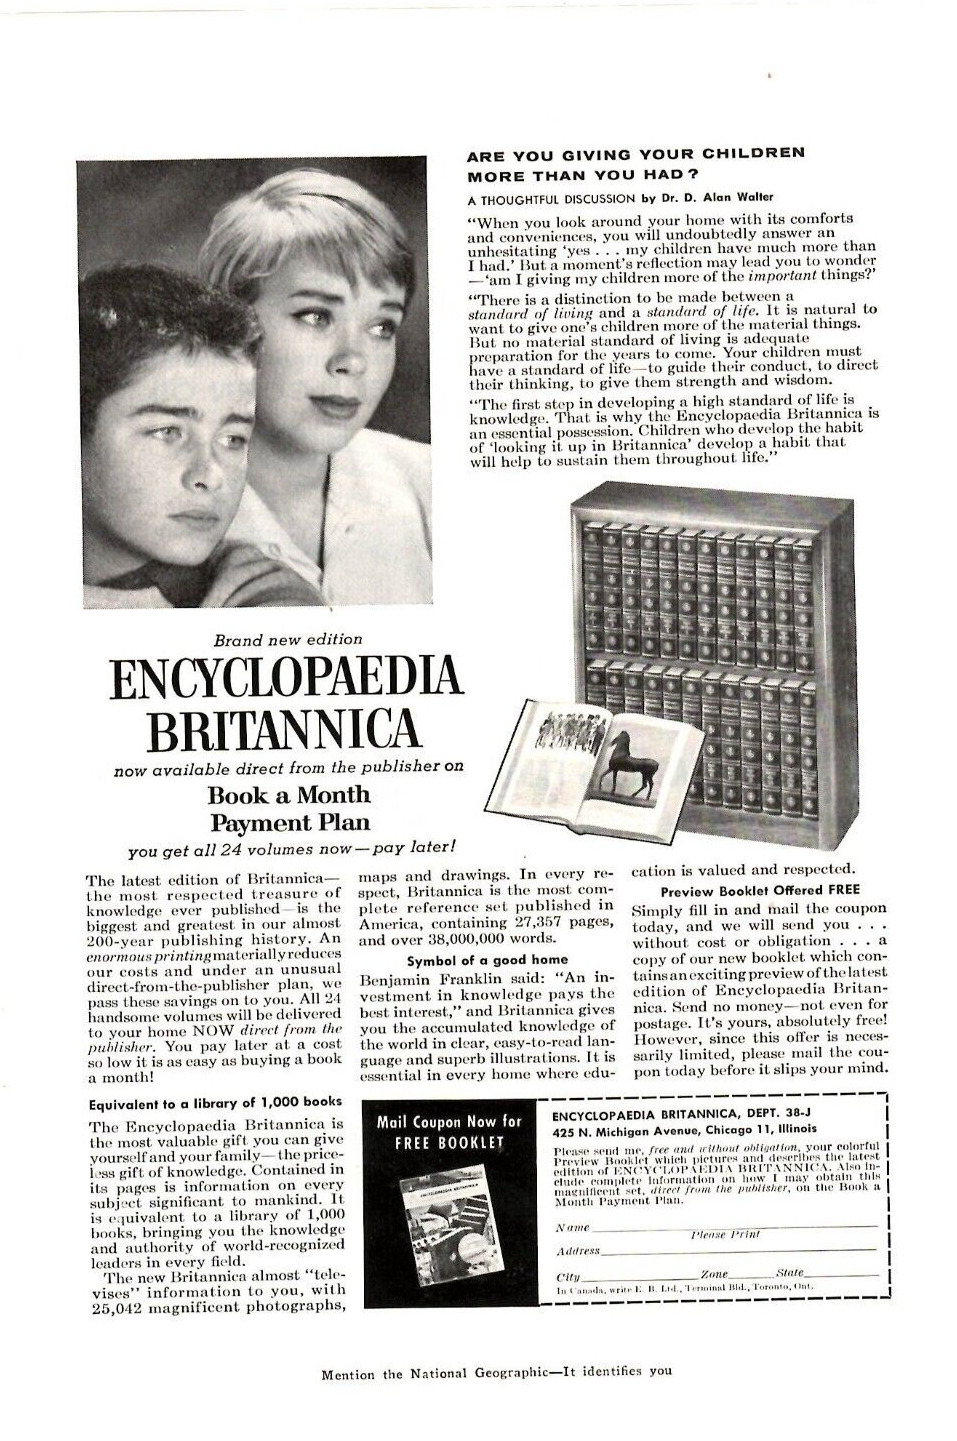 1959 Print Ad Encyclopaedia Britannica Are you giving your children more than